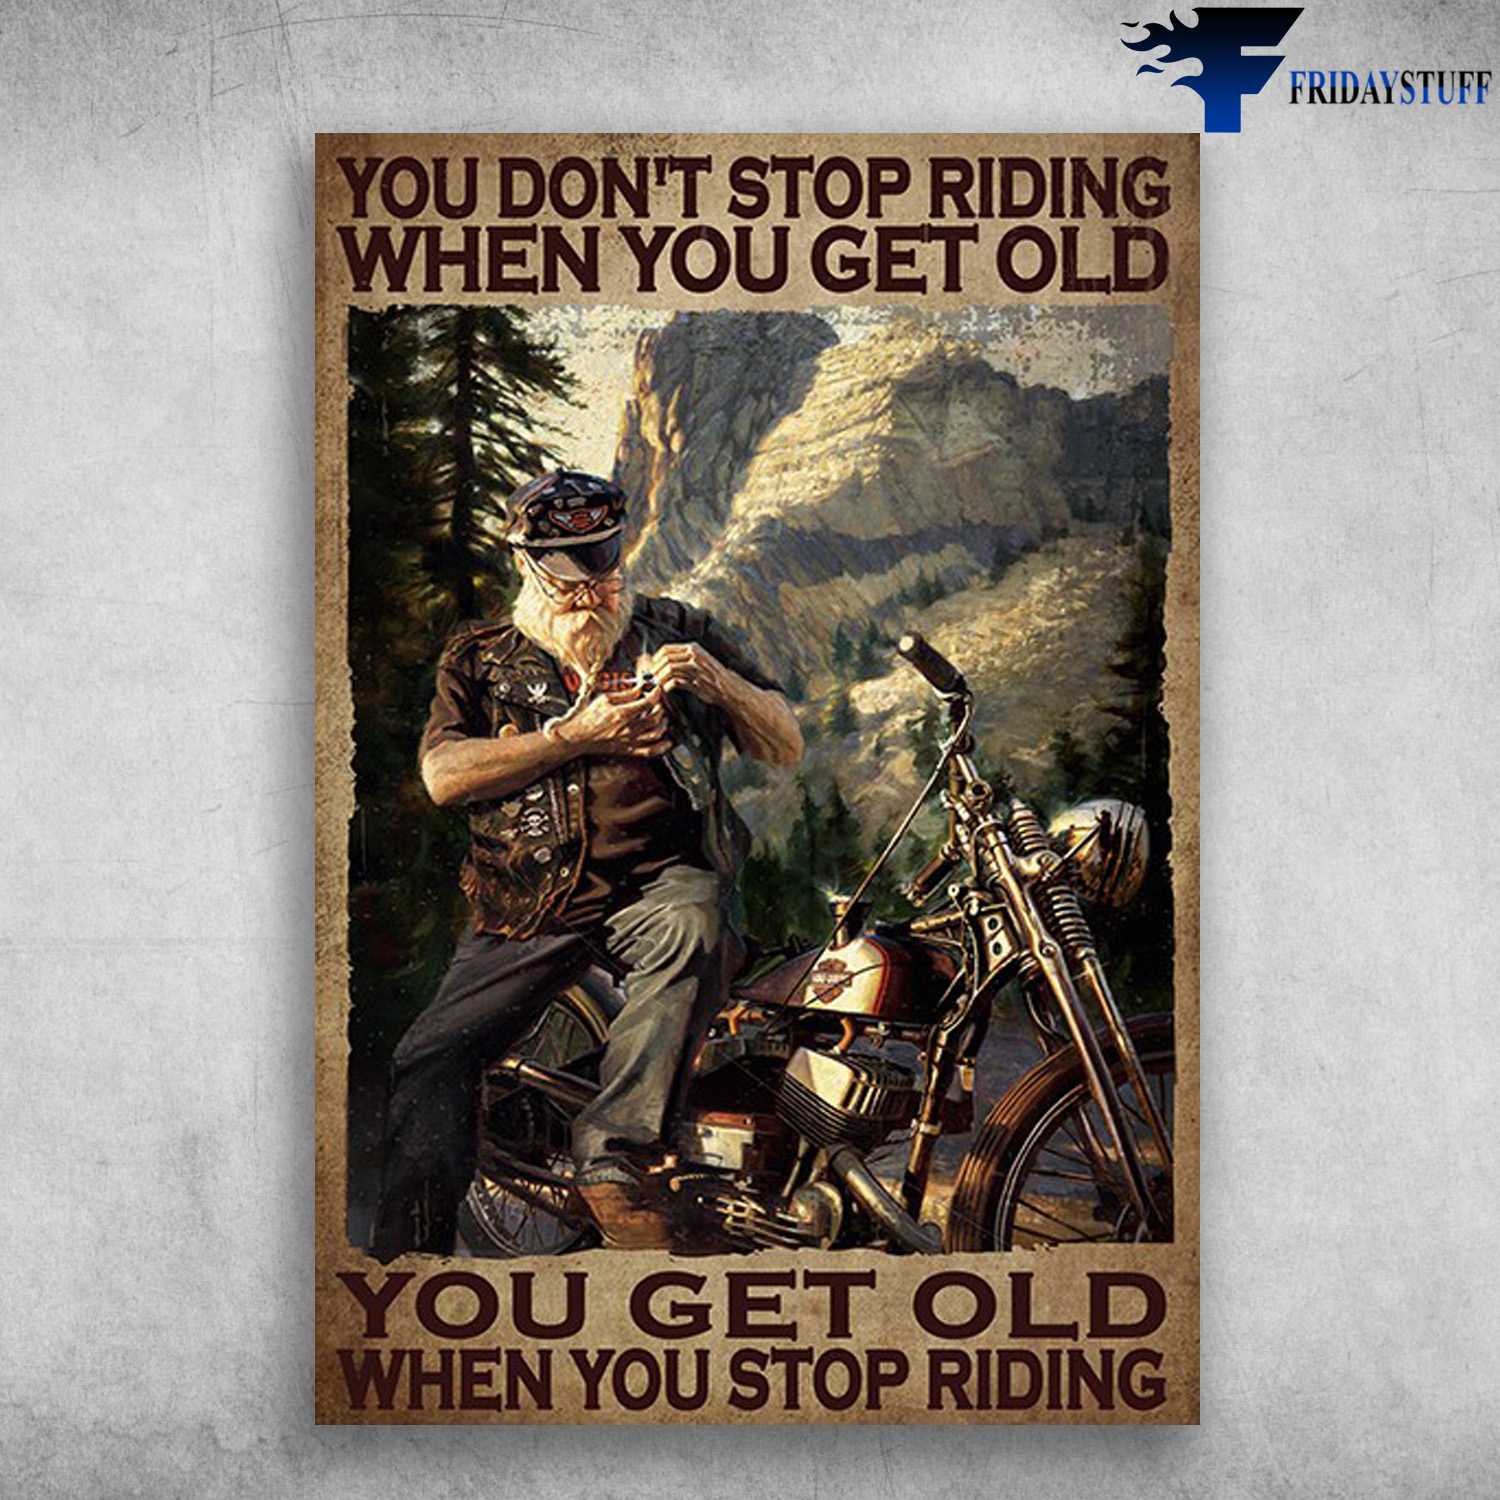 Old Man Riding, Motorbike Lover – You Don’t Stop Riding When You Get Old, You Get Old When You Stop Riding